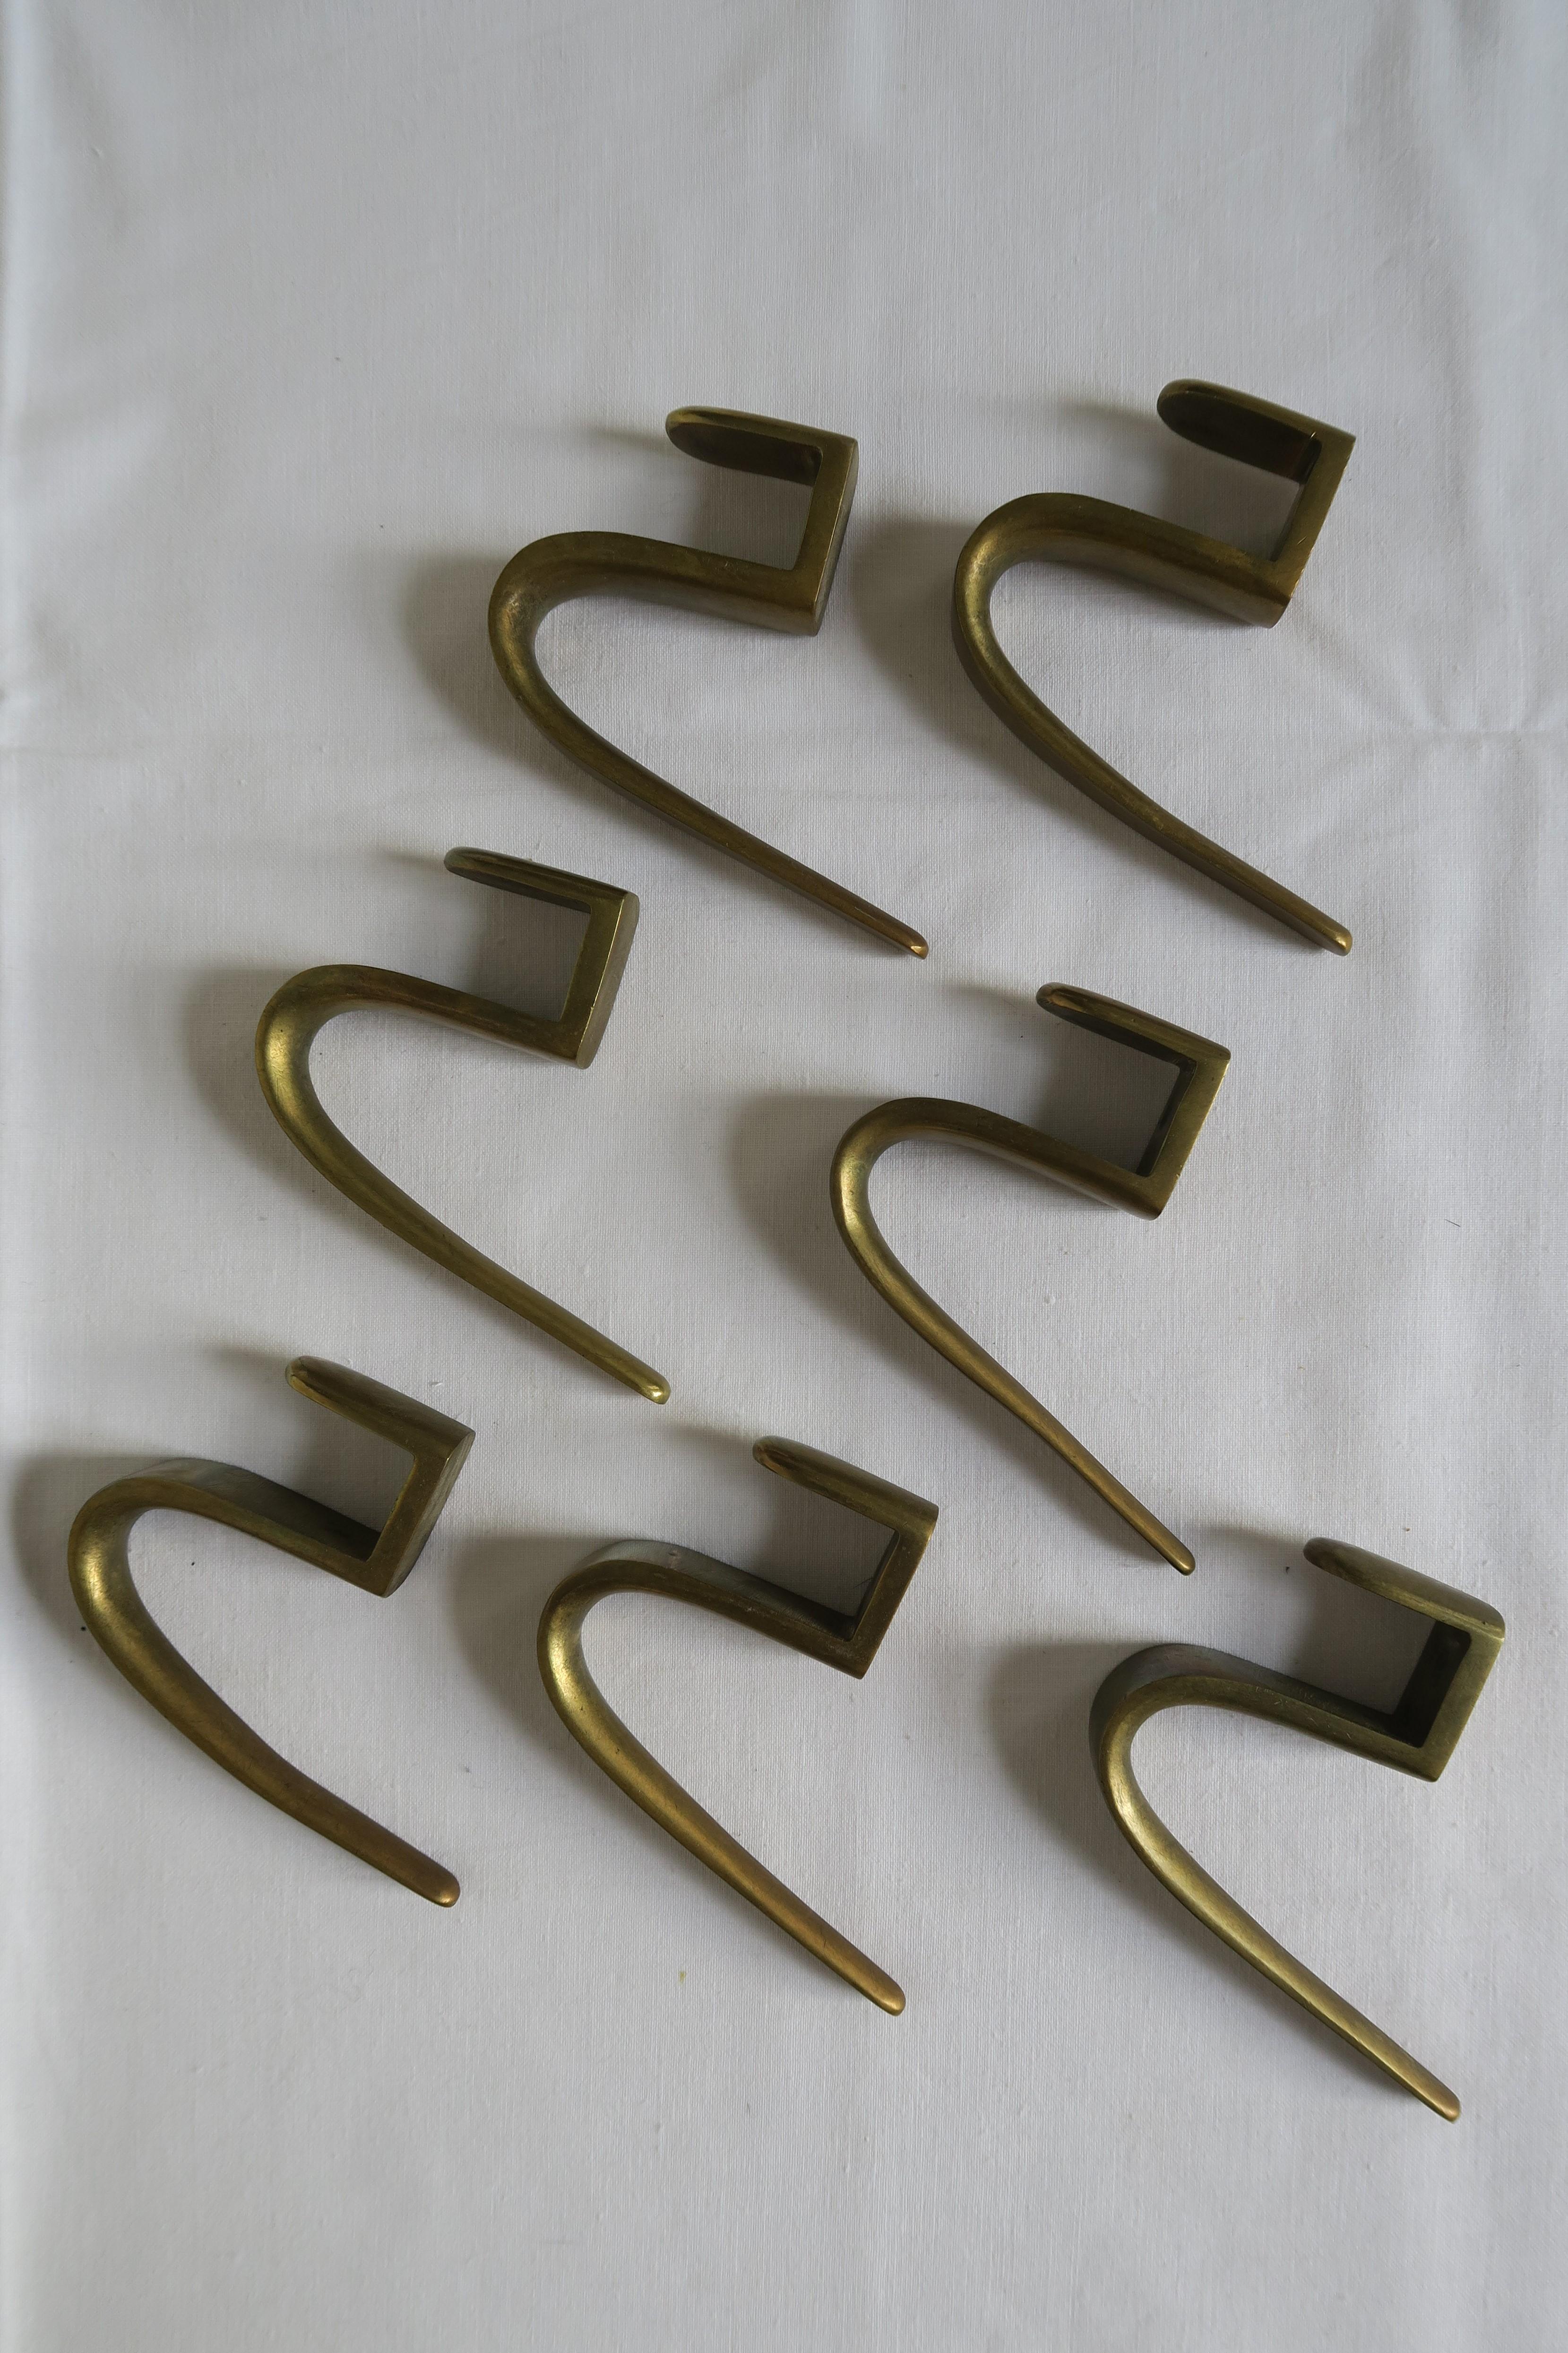 On offer are 7 massive brass coat hooks. They were designed by Carl Auböck in the 1950s and produced manually by his infamous Austrian Werkstätte.
Their shape is beautifully sloped and all the edges are rounded. Time has given them a unique